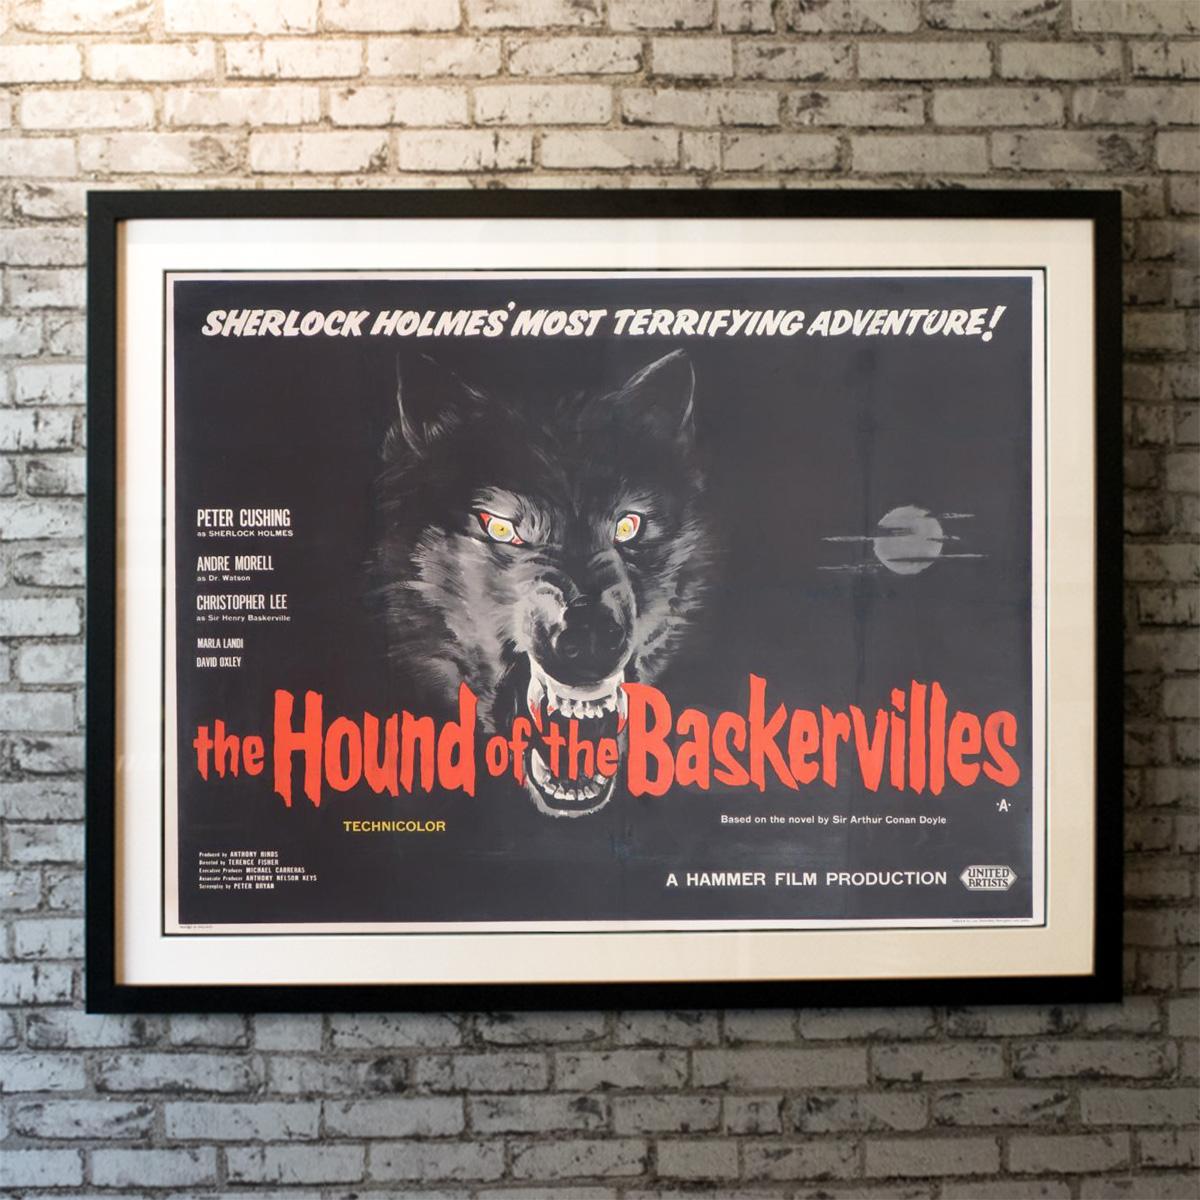 One of the rarest and most sought after UK quads in the hobby. The Hound of the Baskervilles is a 1959 British gothic horror mystery film directed by Terence Fisher and produced by Hammer Film Productions. It is based on the novel of the same title